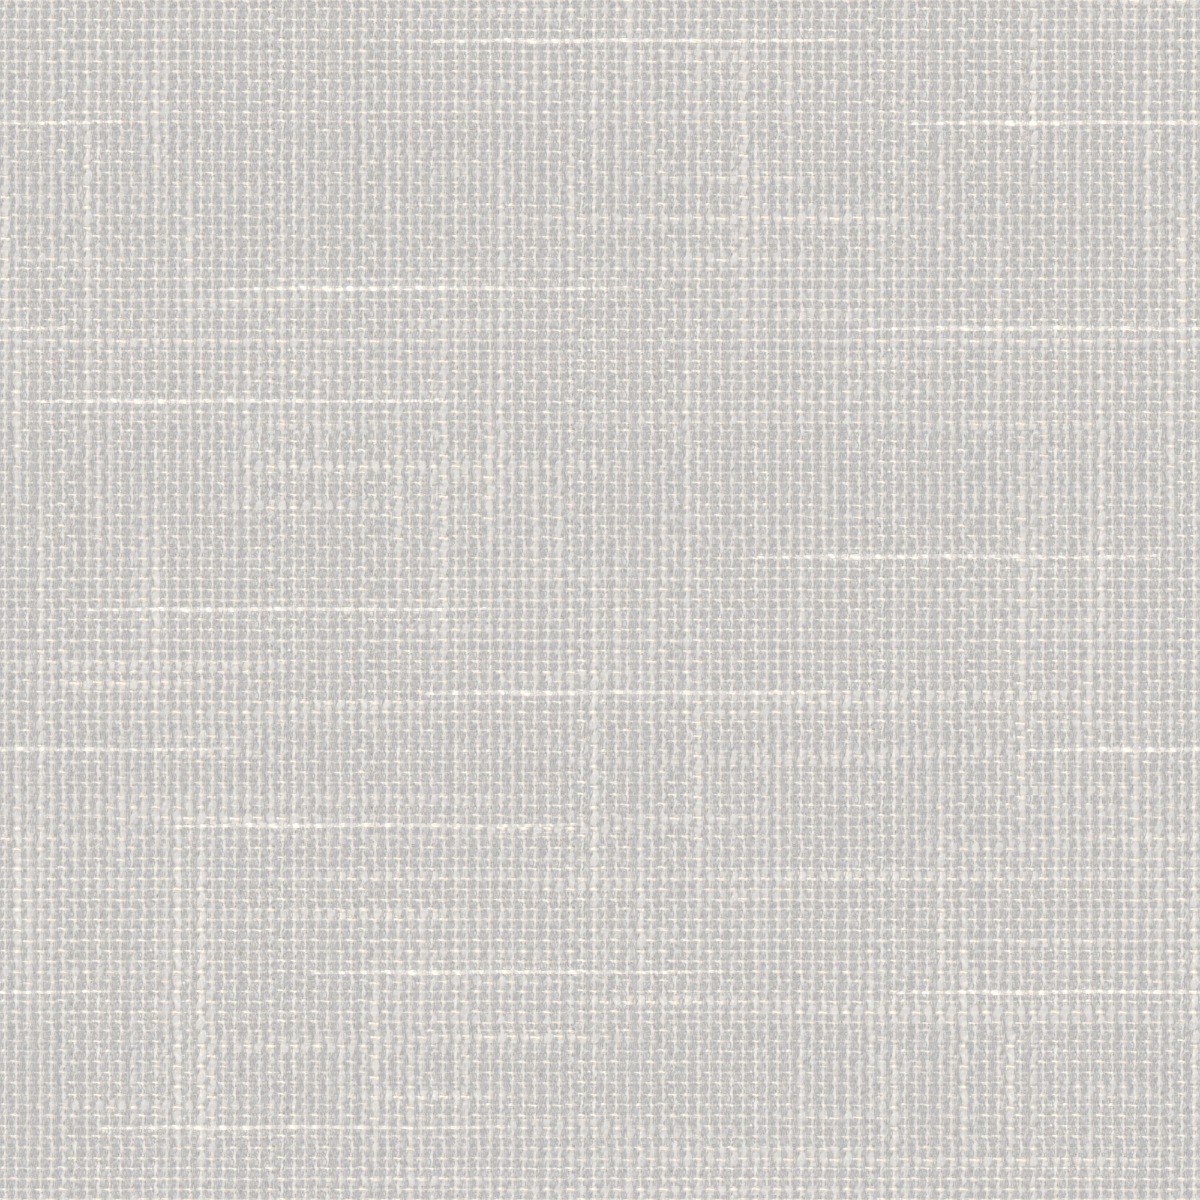 A seamless fabric texture with plain white sheer units arranged in a None pattern